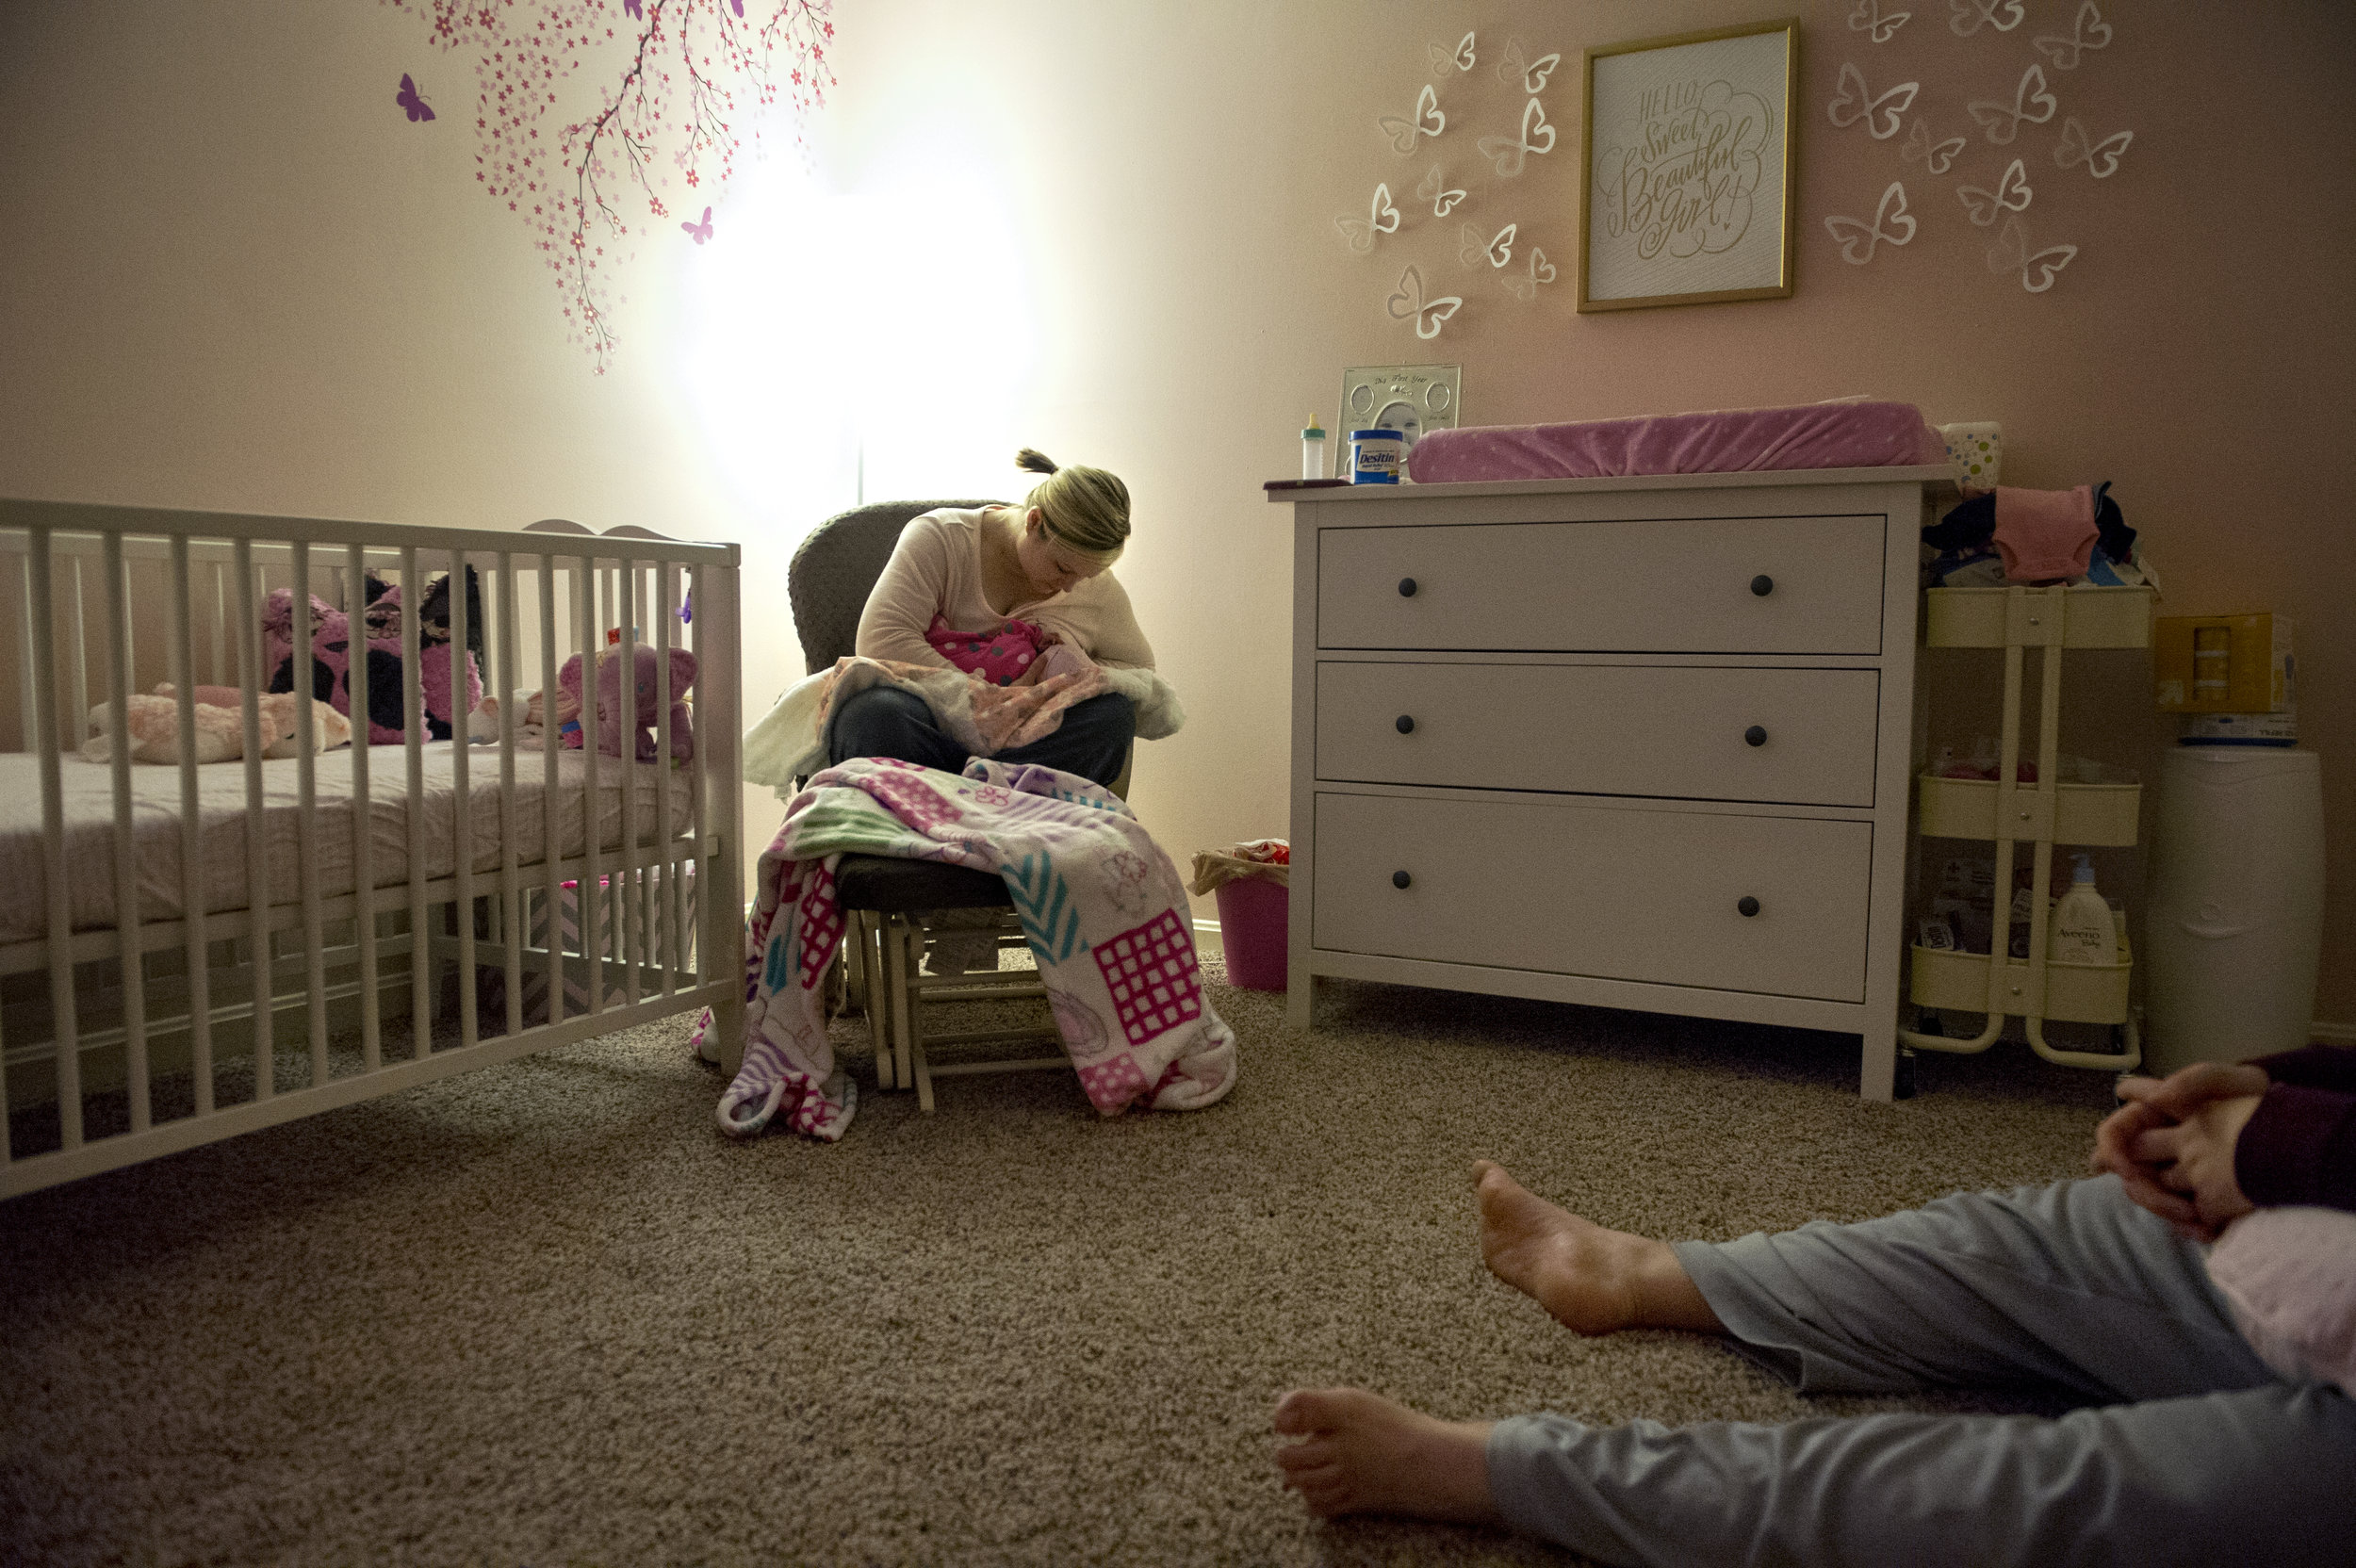  Erickia breast feeds Gracelyn while Michael sits on the floor and wakes himself up after a night of taking turns tending to the newborn at their home in Evansville Thursday Dec. 11, 2014. Over the past seven years Erickia's has physically sacrificed